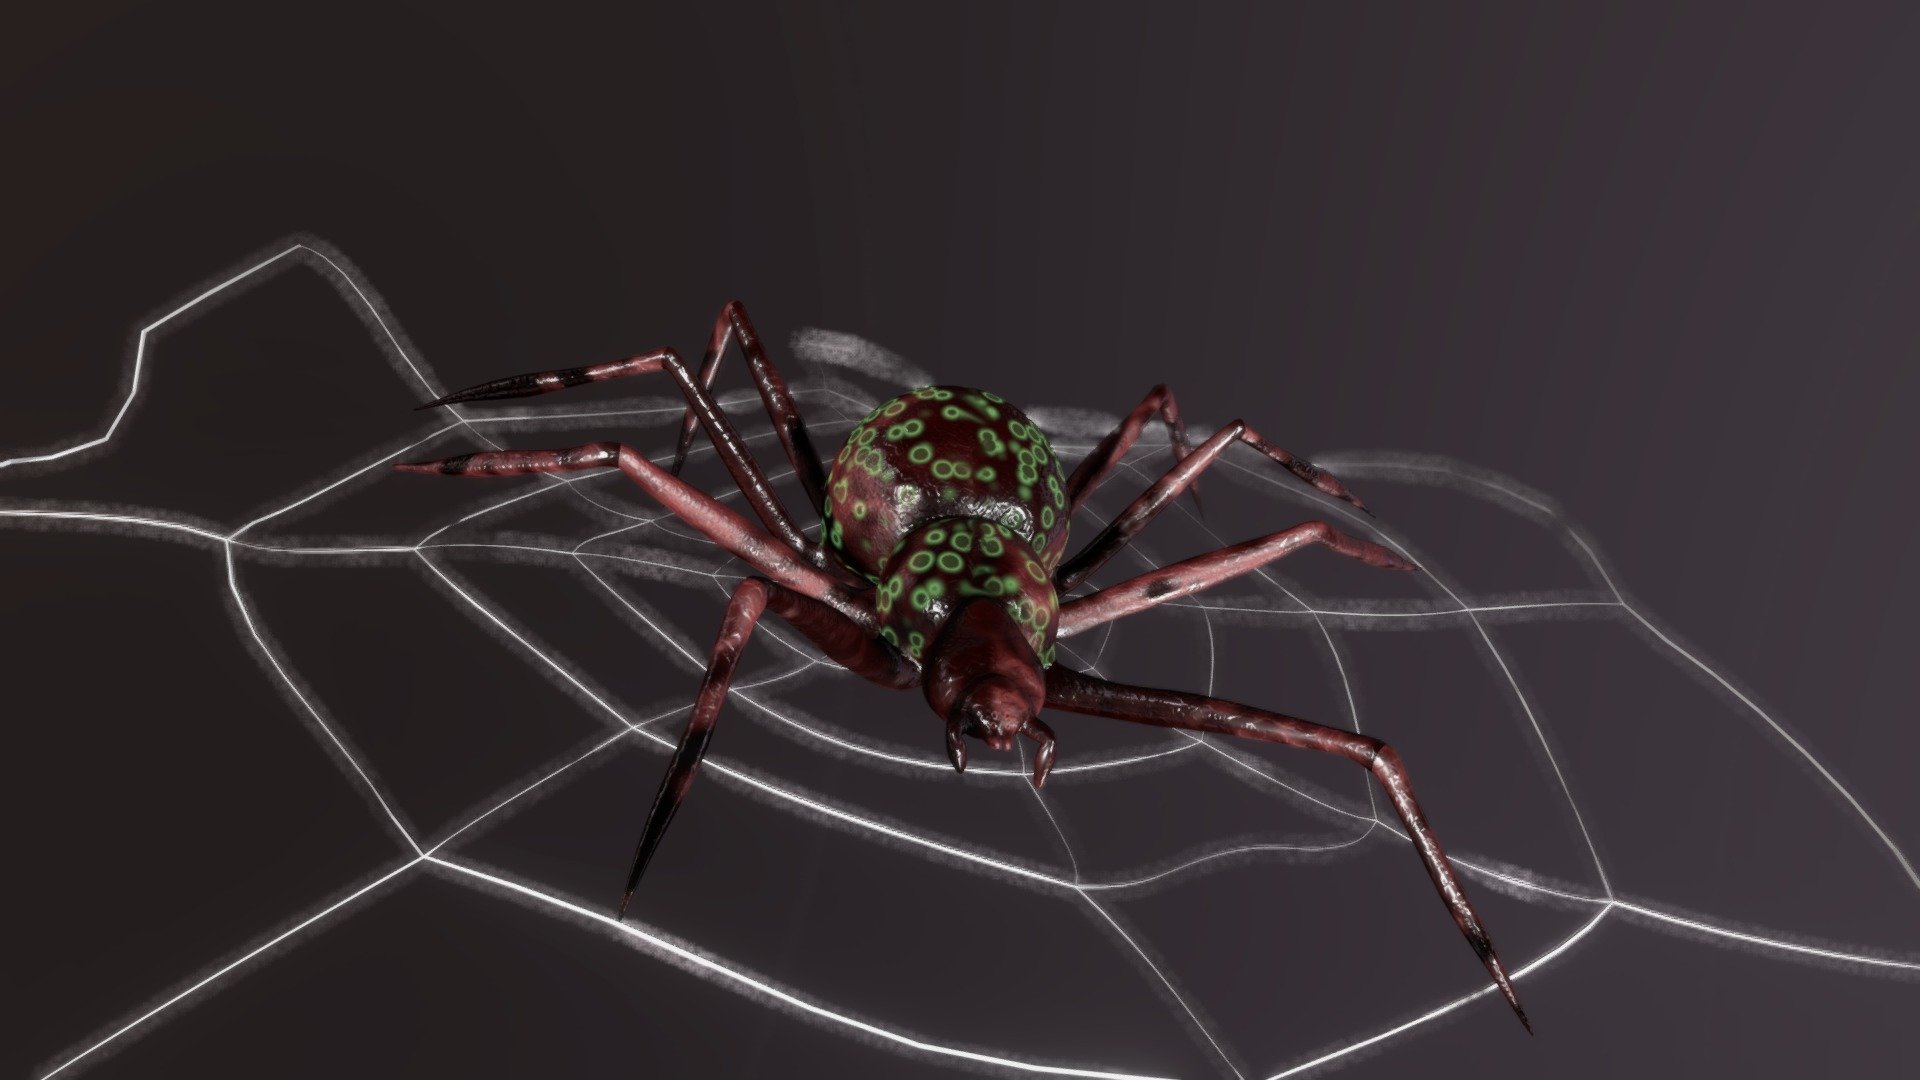 A spider on a web. It does not resemble an actual species since I made it up. The model was rigged intially but the sketchfab renderer wouldn't display it properly so I had to apply the armature and delete it. You can find the original model here https://www.blendswap.com/blends/view/84144 - Spider - Download Free 3D model by iamlookingforthebathroom 3d model